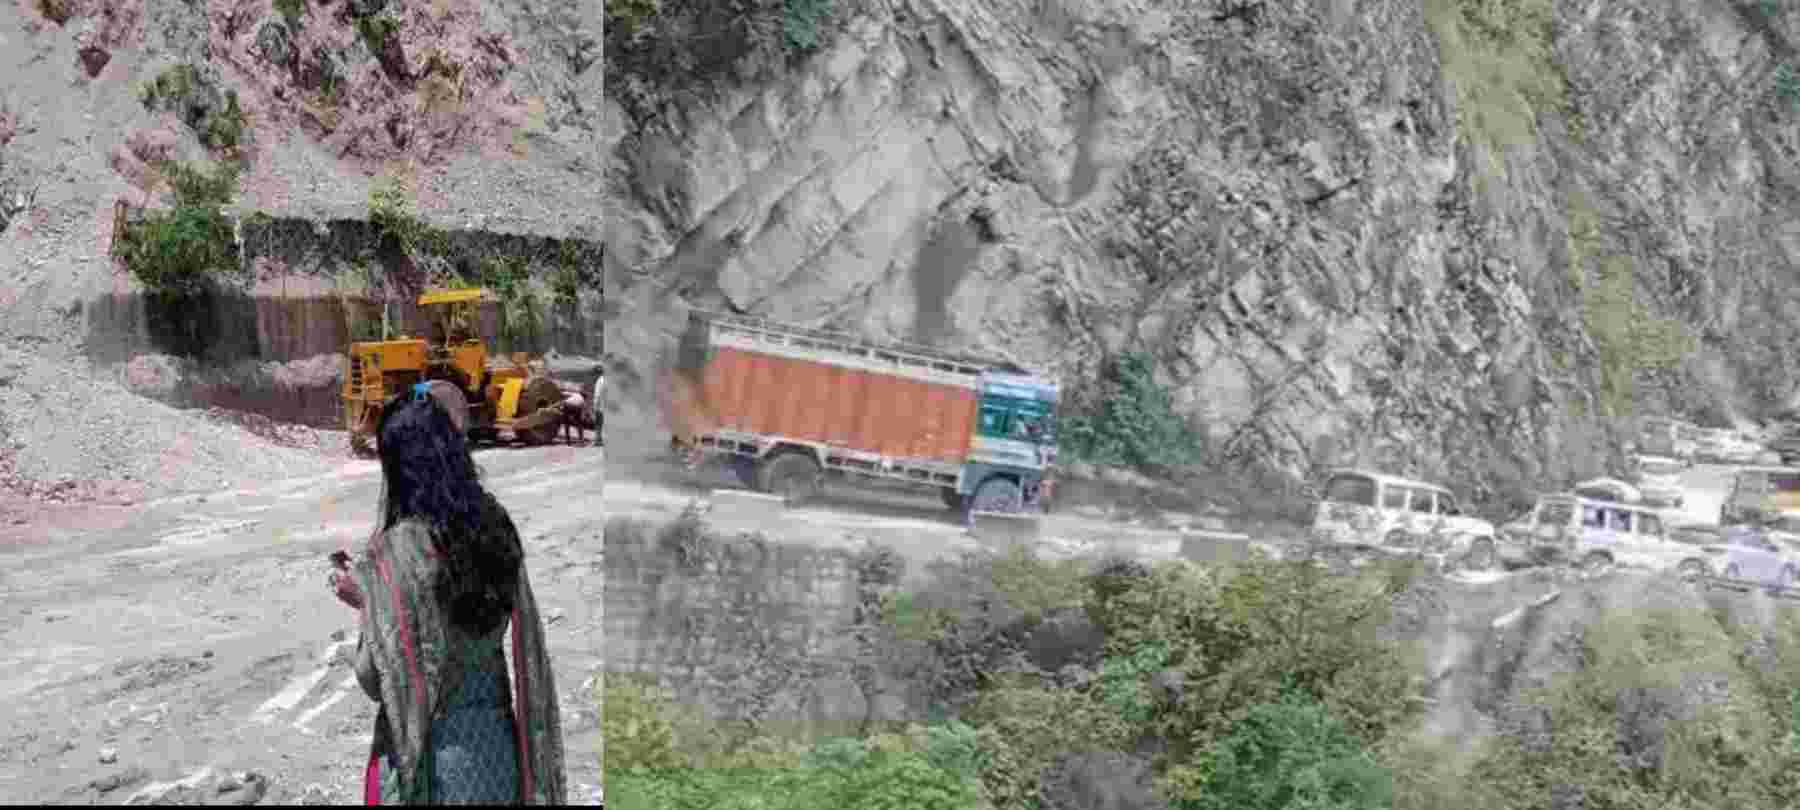 Rudraprayag: Badrinath sirobaghad Highway opened after full 36 hours, traffic became smooth